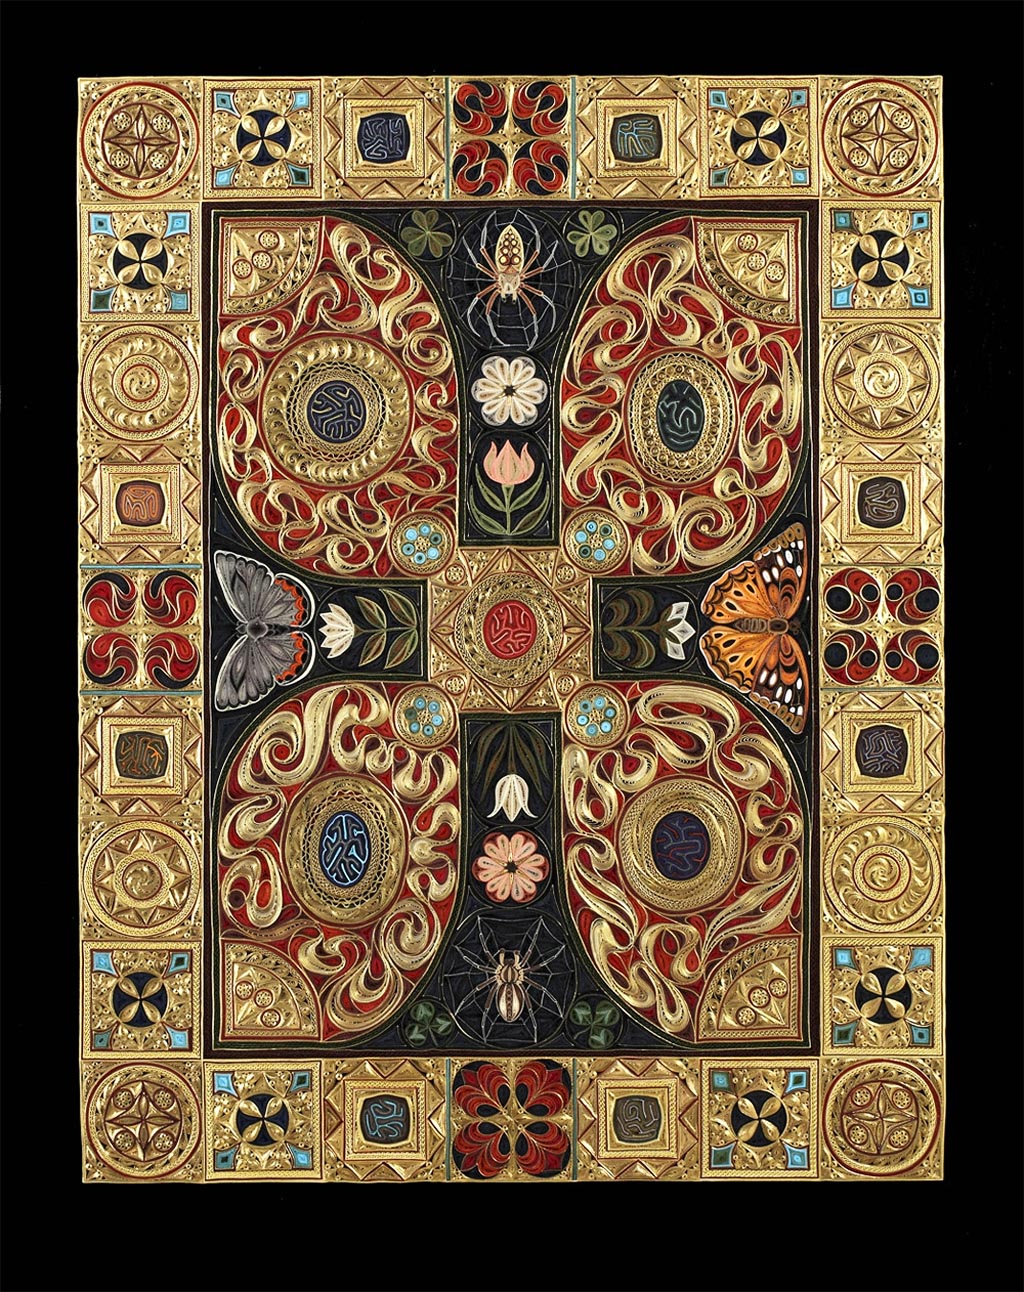 Quilled Paper Carpet and Gospel Book Cover